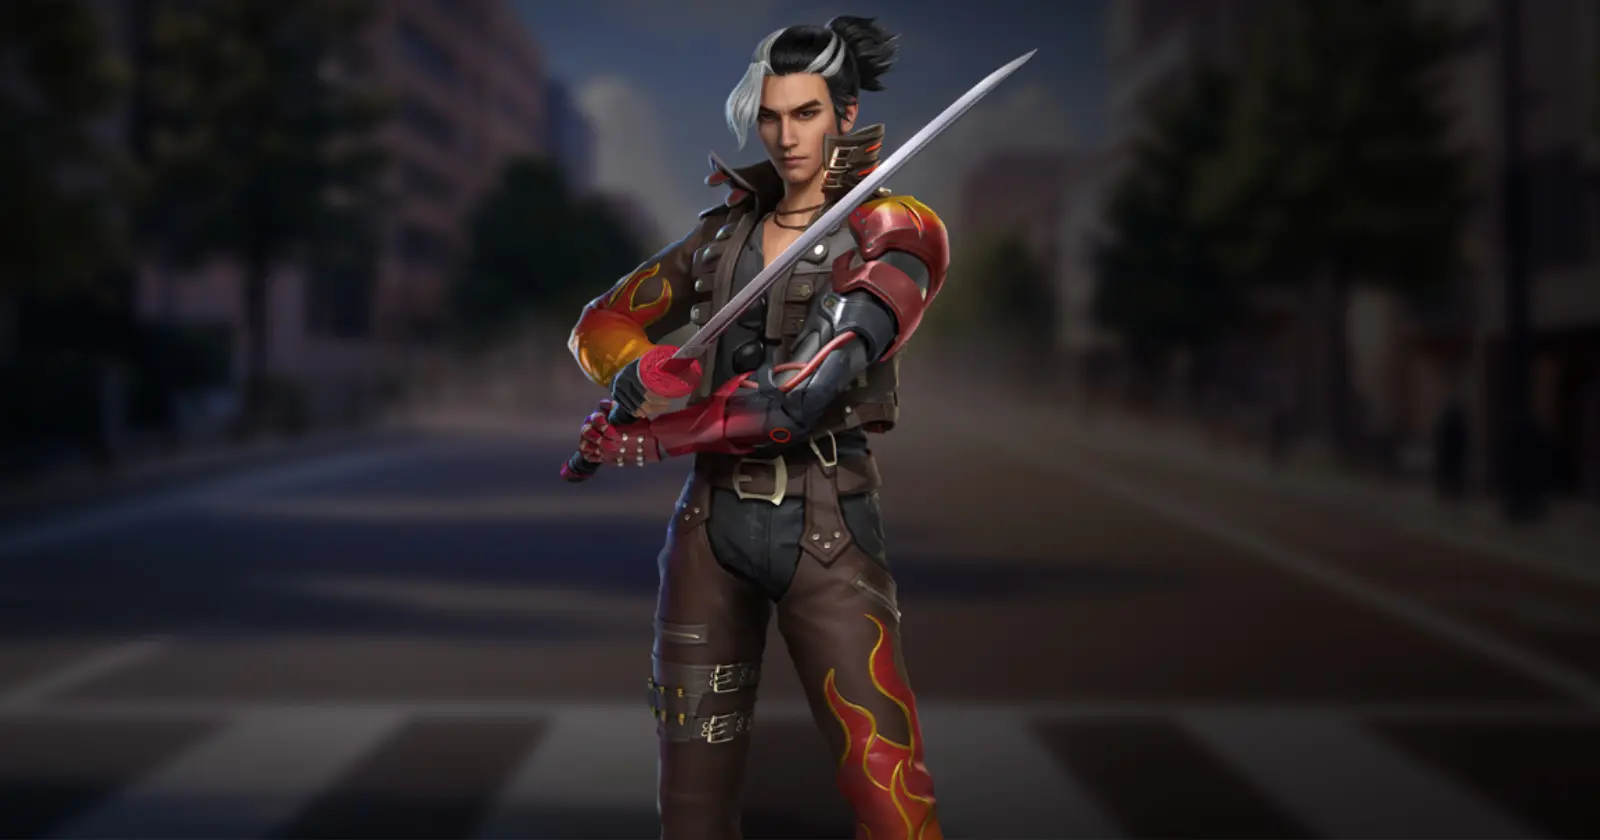 The armored Hayato character in red and black, sword ready, stands on an empty urban street.